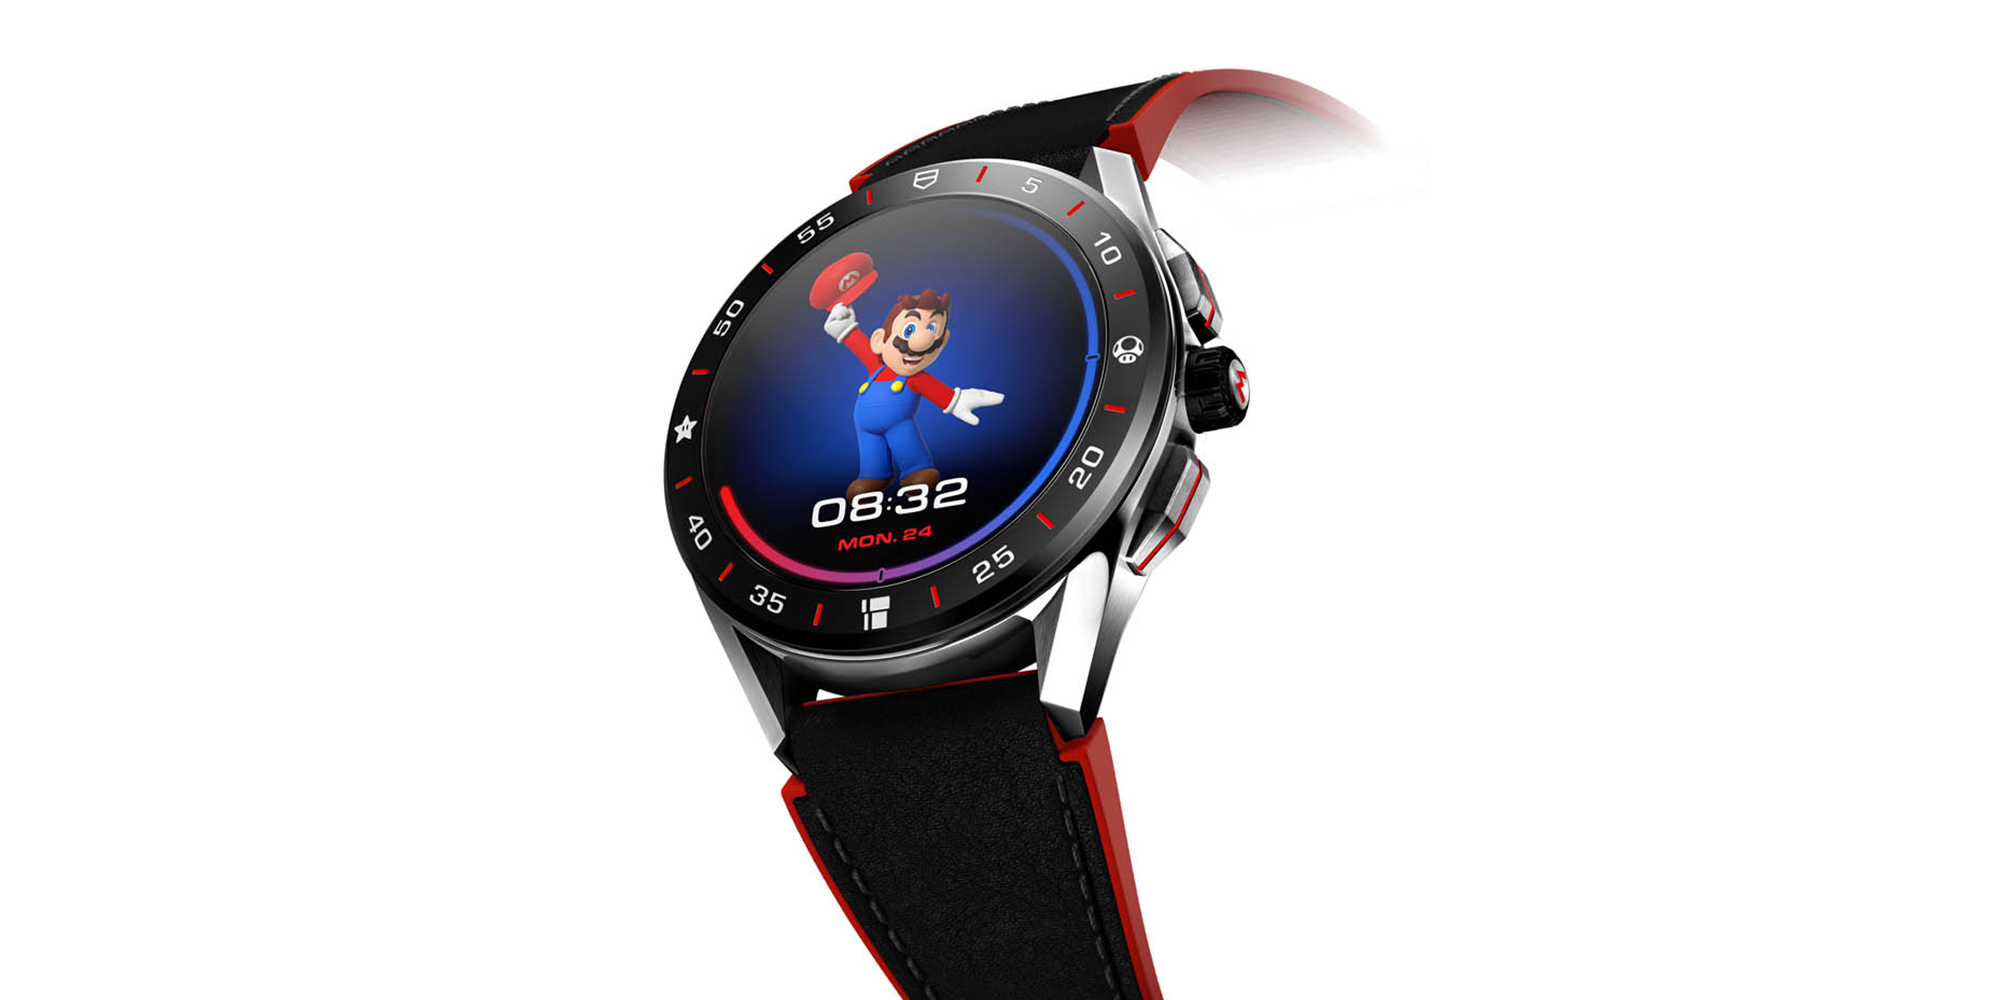 amplitude Hechting Sanctie Tag Heuer launches Super Mario Wear OS-powered watch - 9to5Google